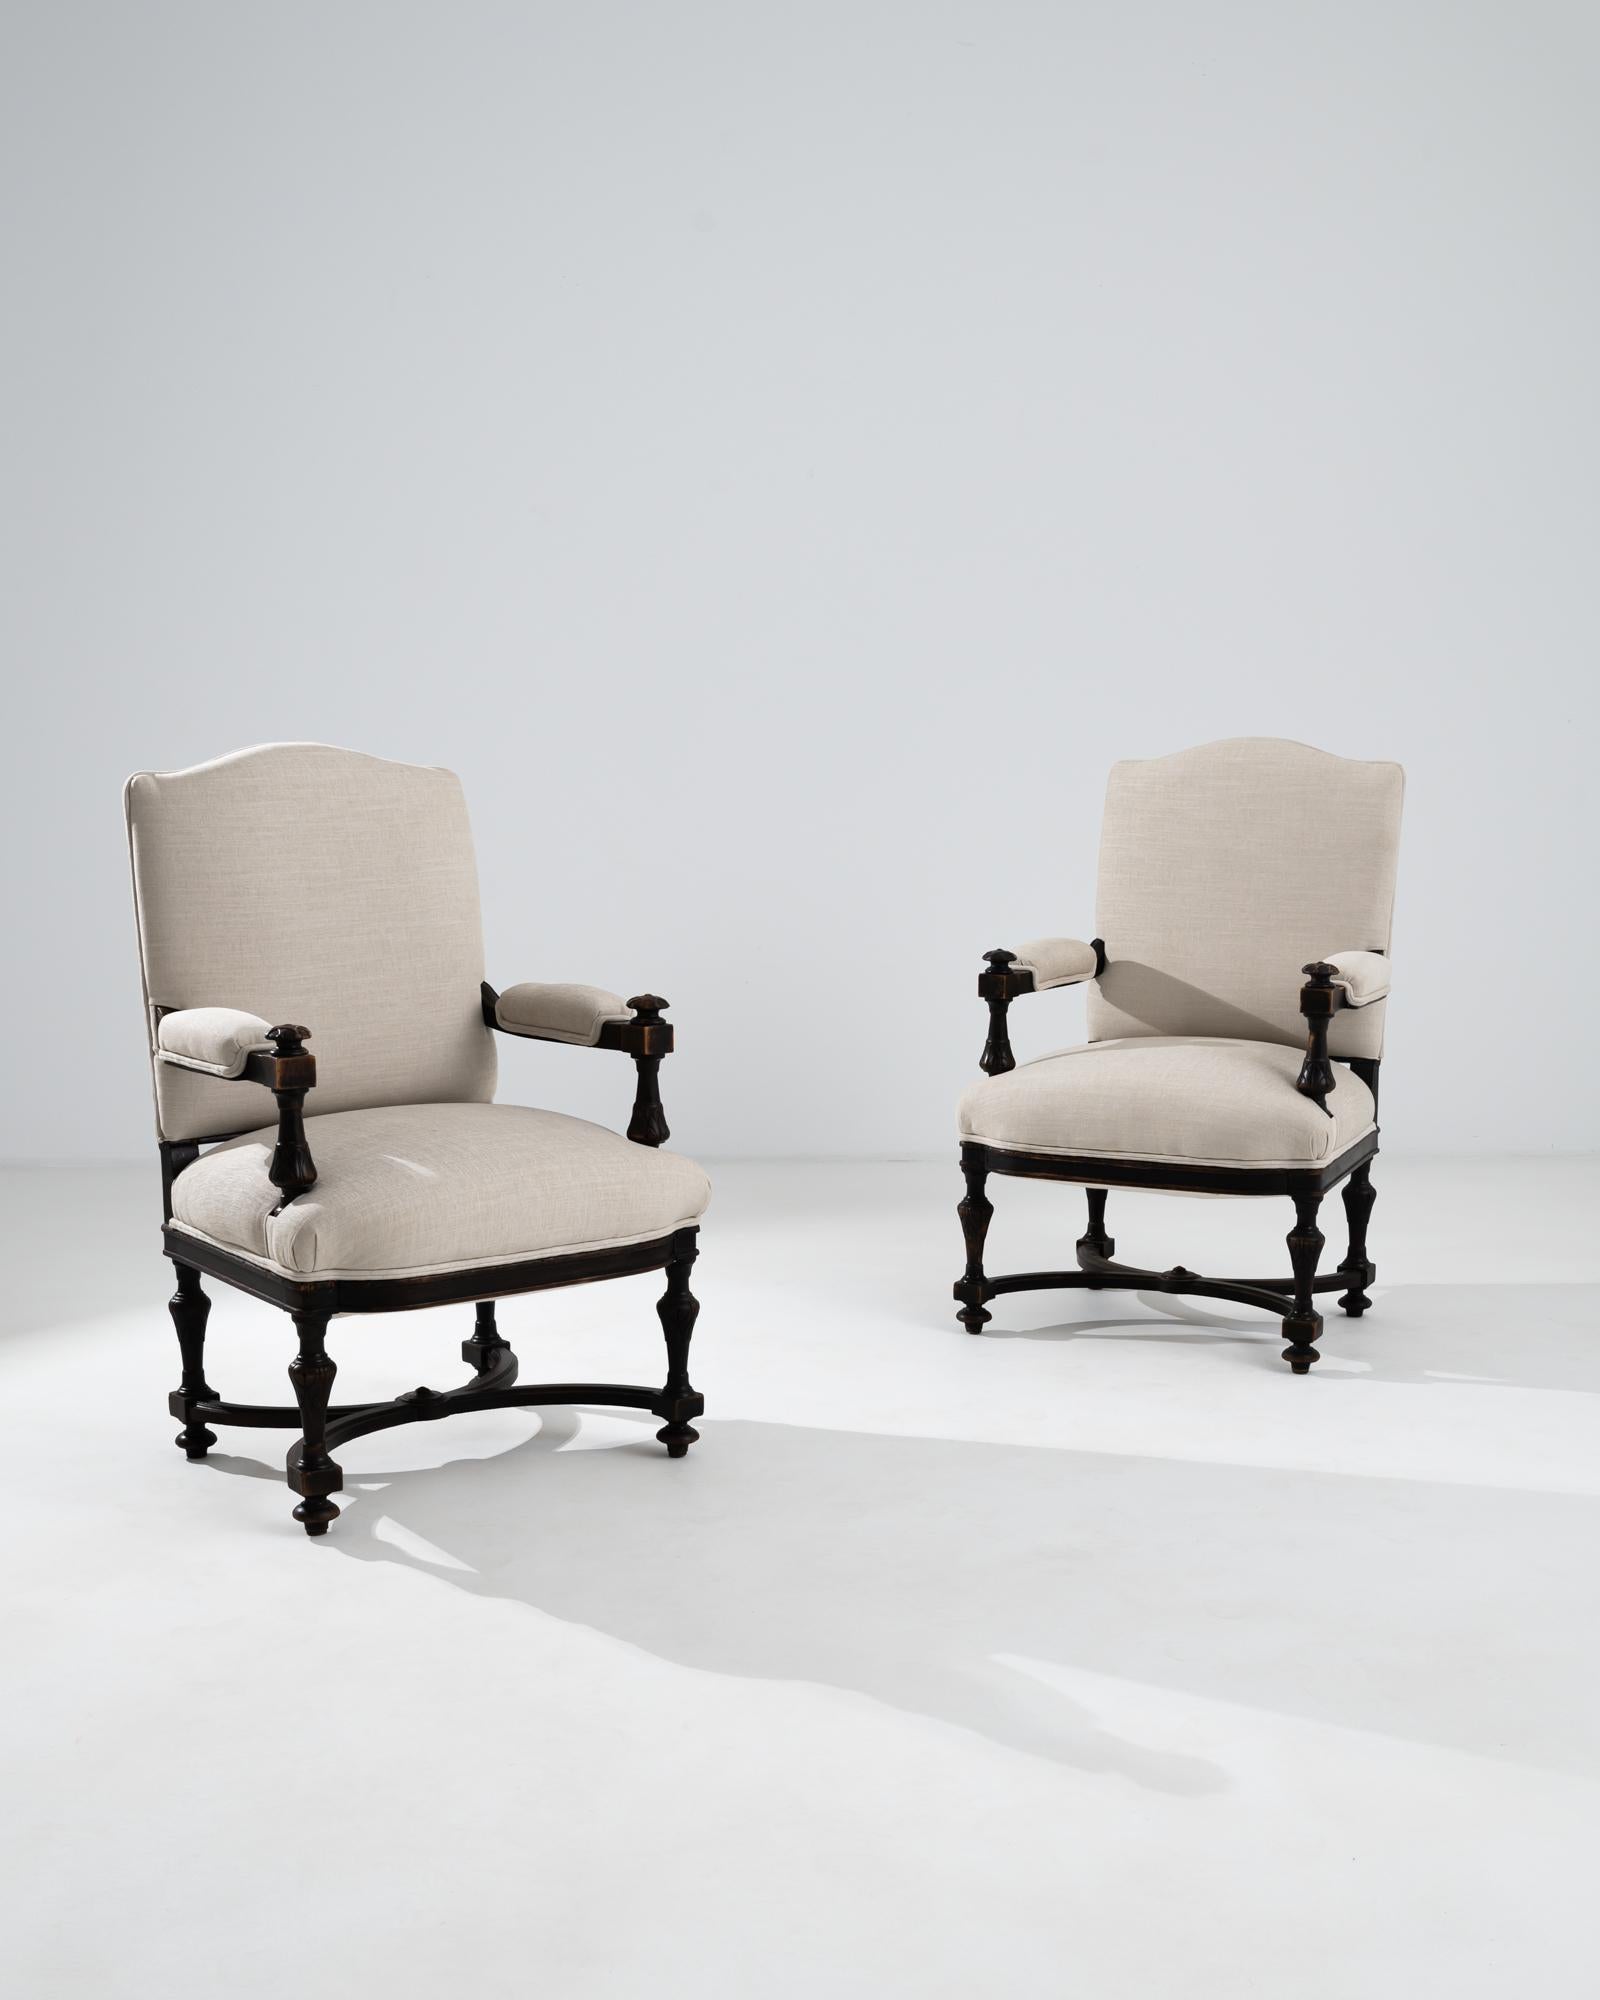 A pair of hardwood armchairs with upholstered seats and backrests from France, circa 1860. A warm and pleasing glow emits from the dark brown wood that composes these elegant chairs. The throne-like frame is embellished with elaborate carving,